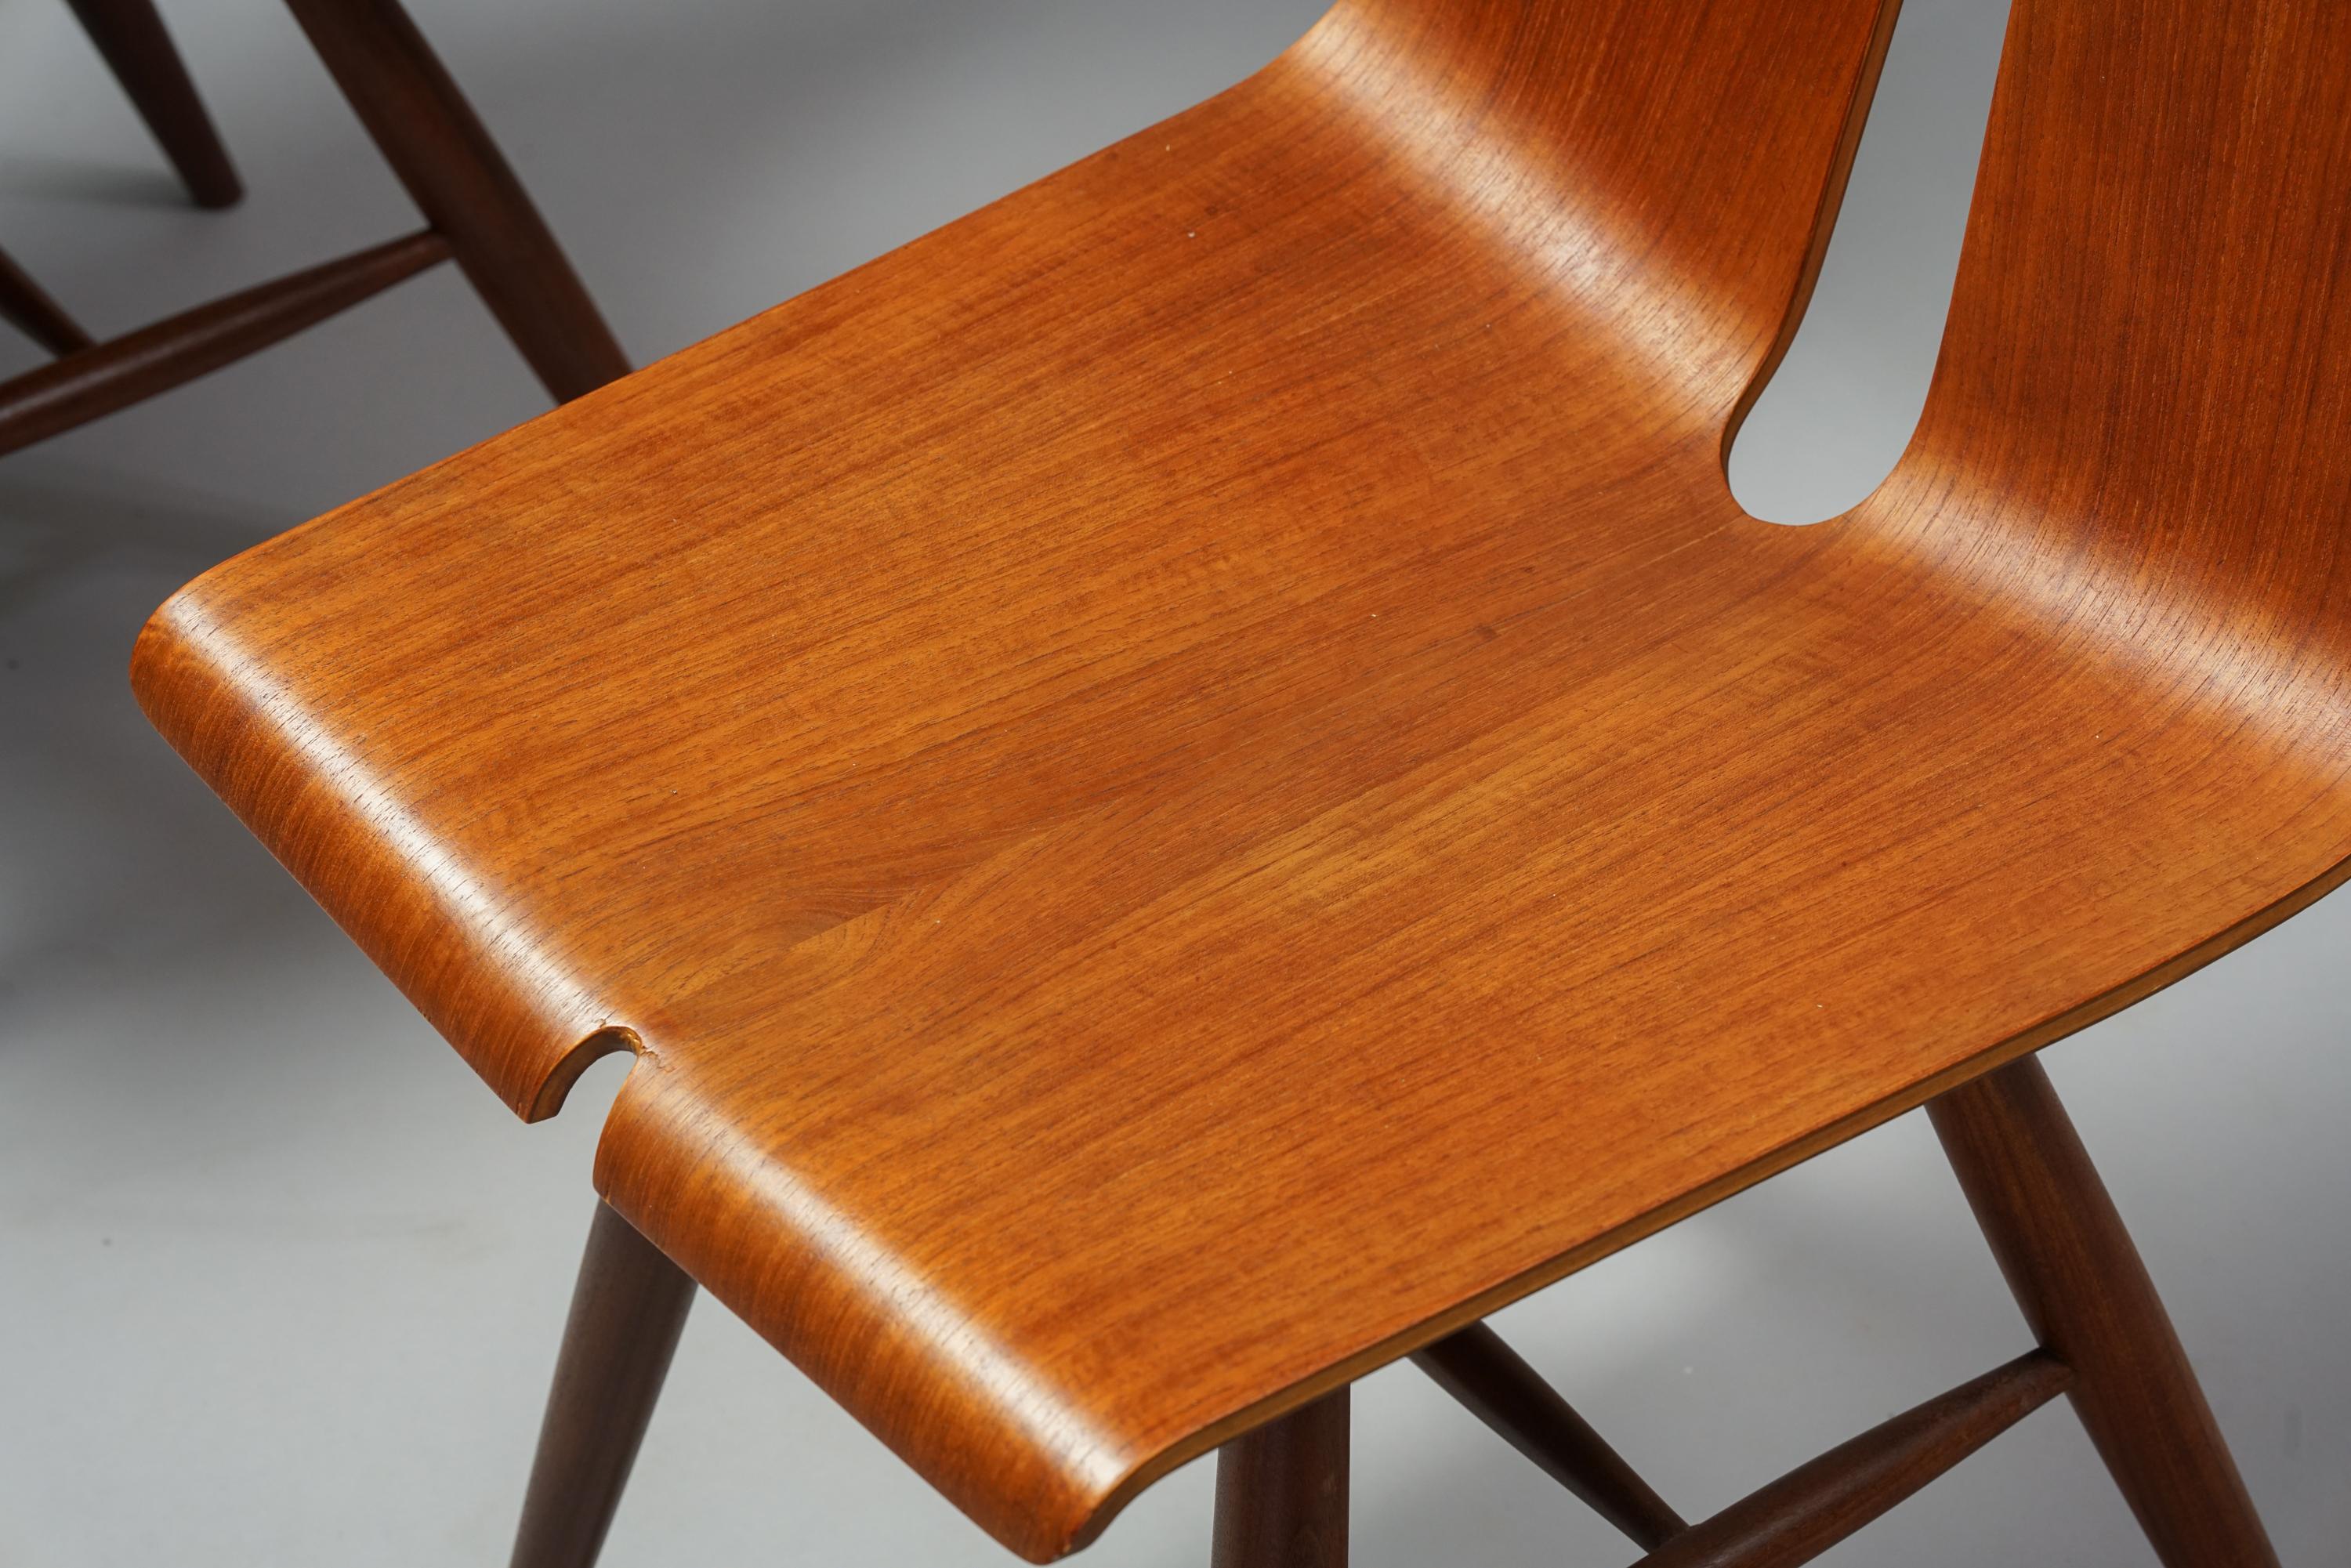 Finnish Set of Four Model 441 Dining Chairs in Teak by Risto Halme for Isku, 1960s